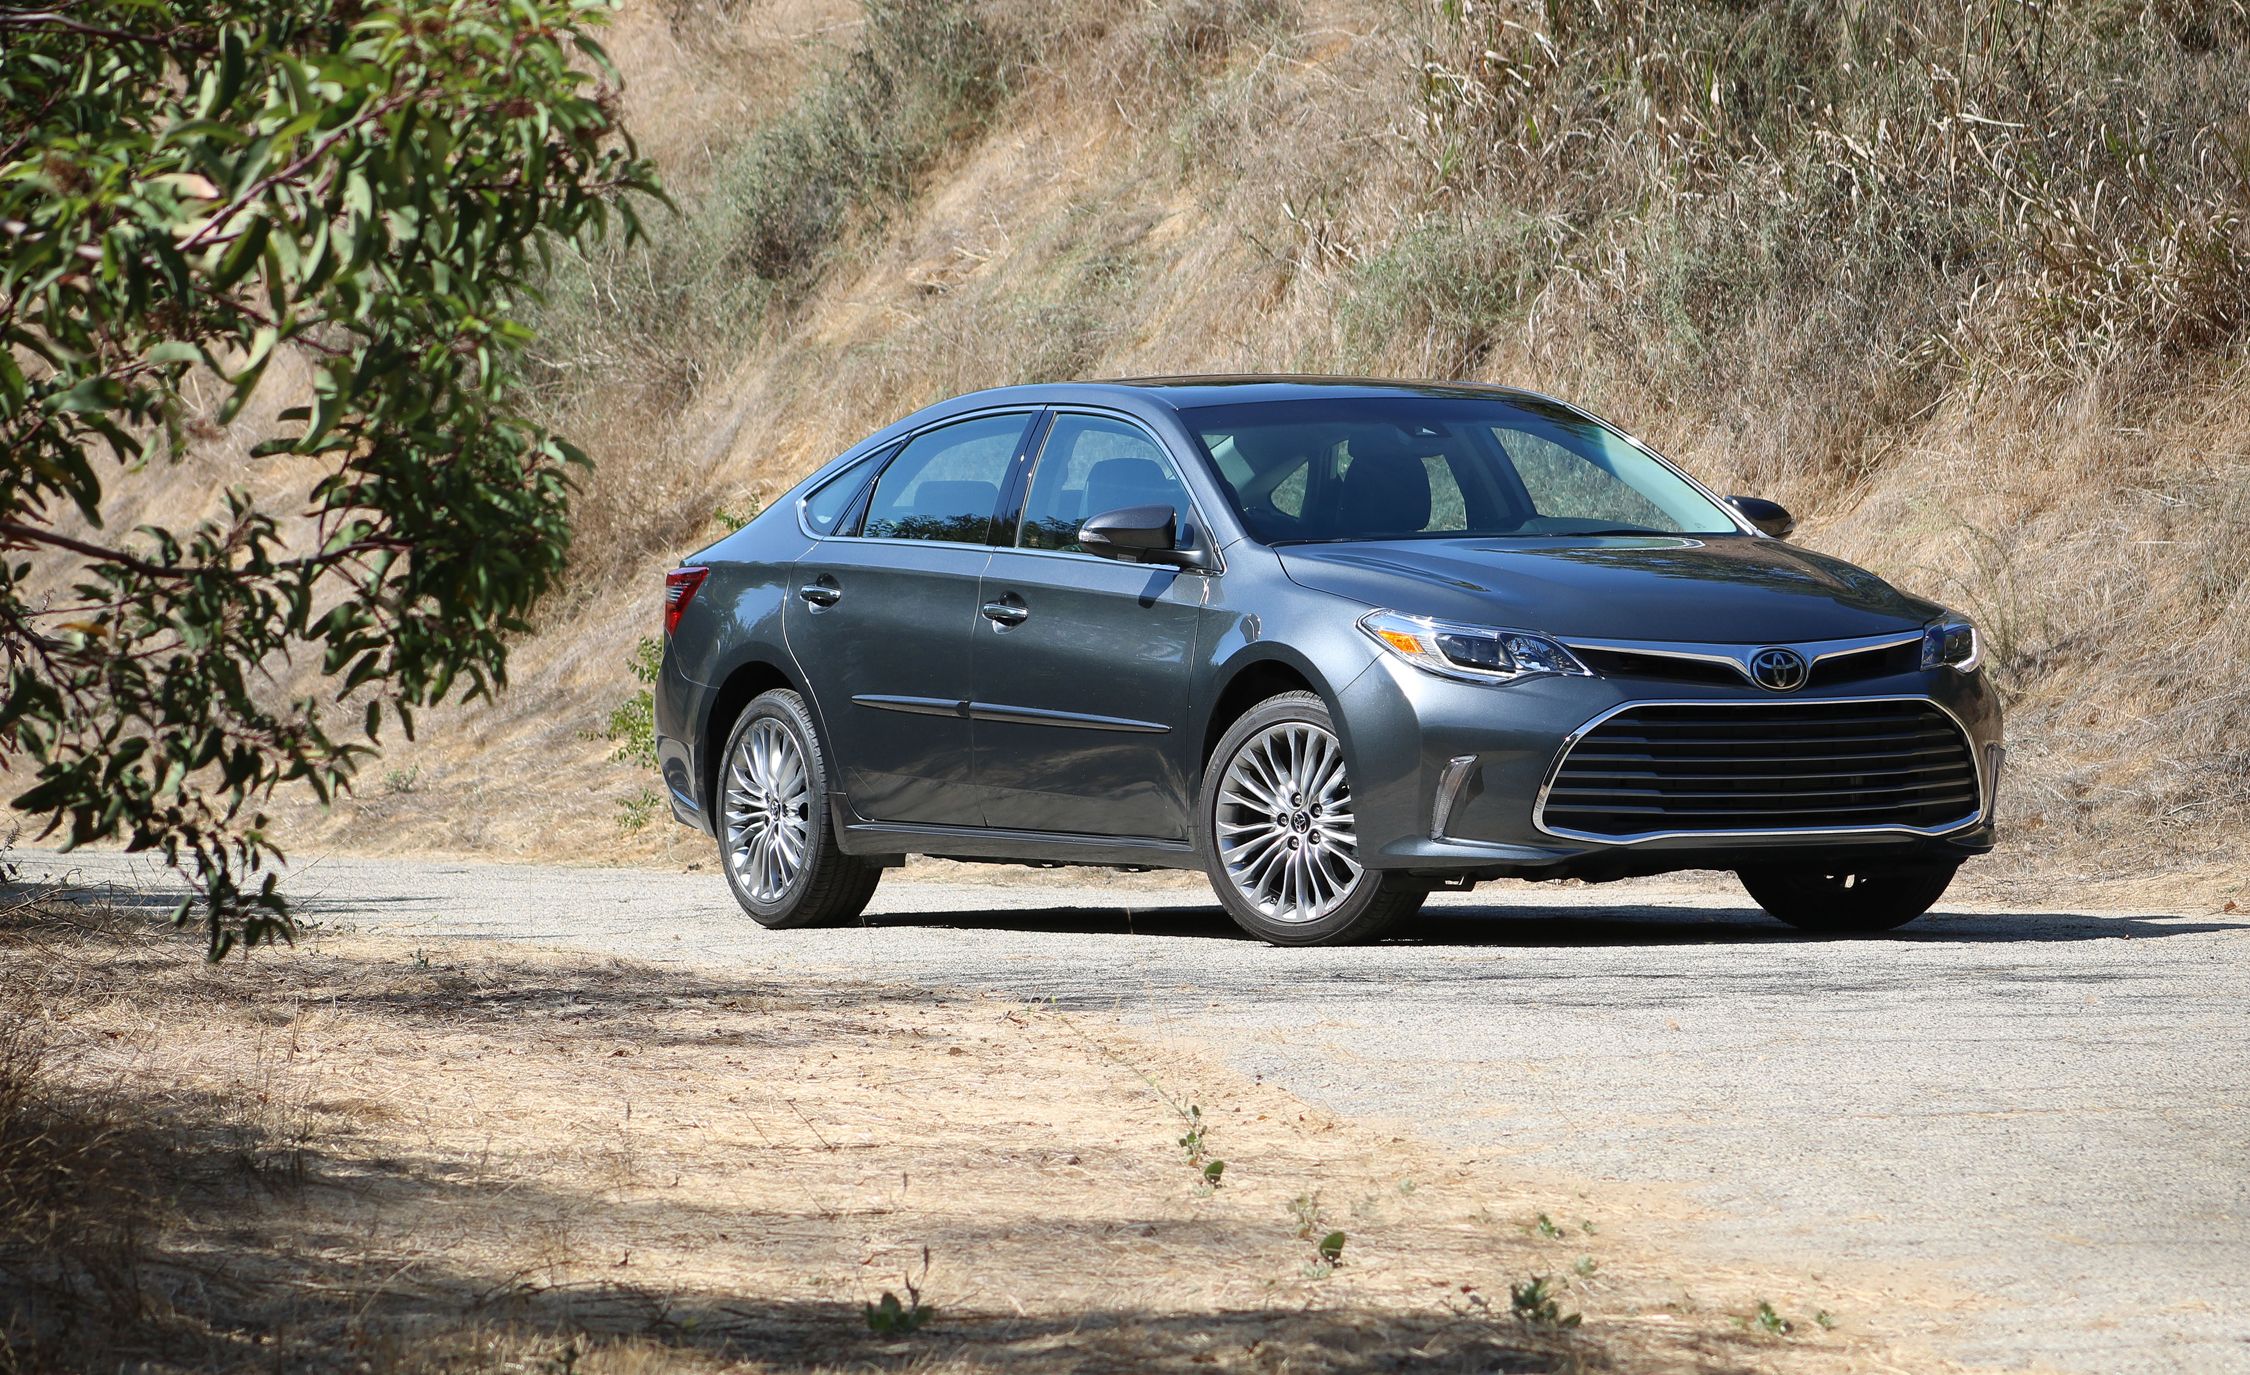 2018 Toyota Avalon Review: Relaxed-Fit Sedan